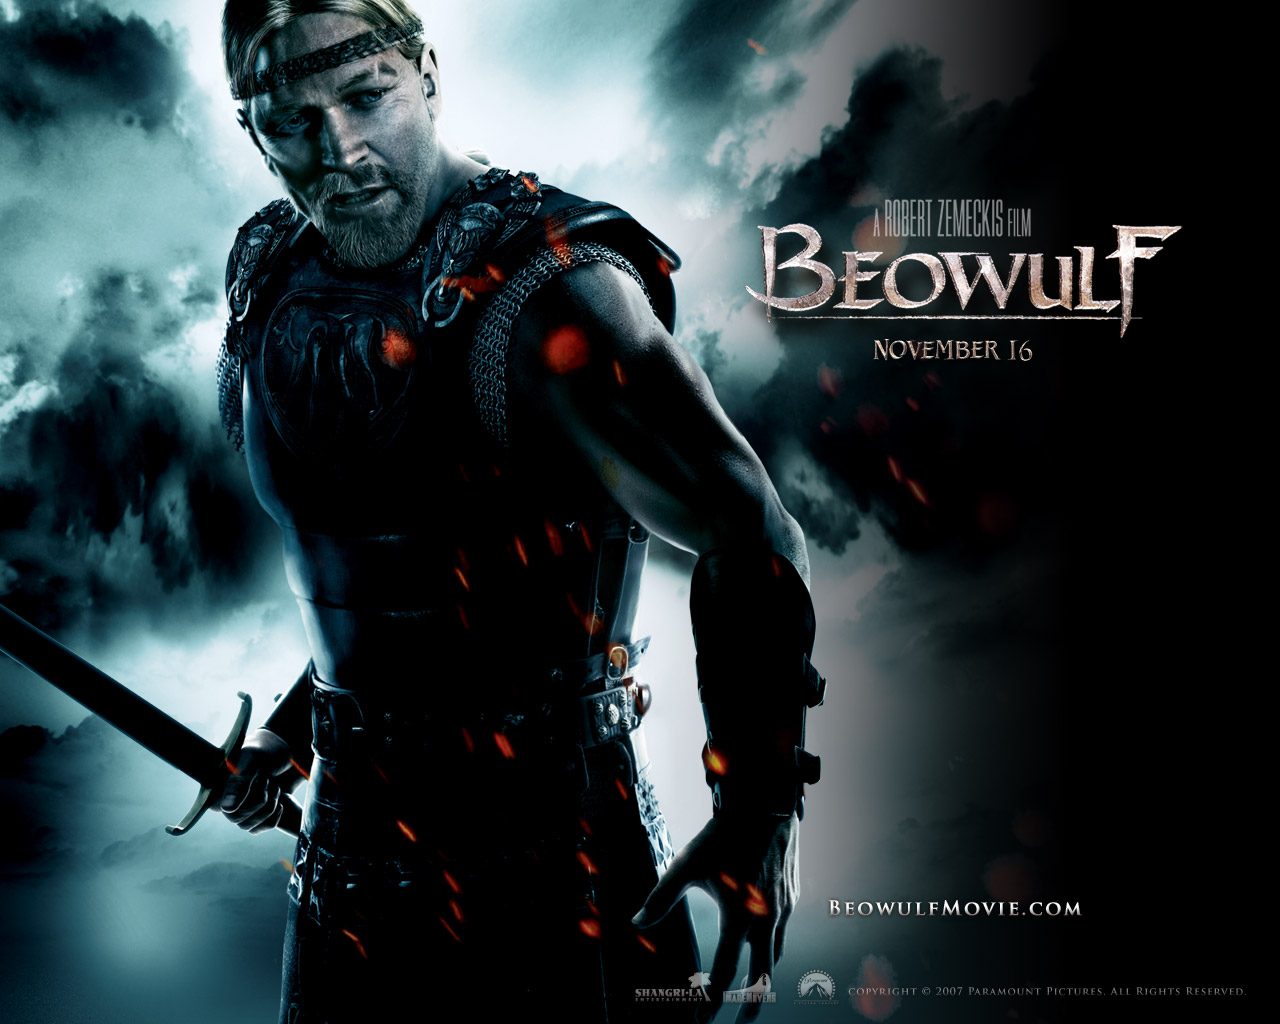 HD Wallpapers Ray Winstone star as Beowulf in Paramount Pictures' Beowulf